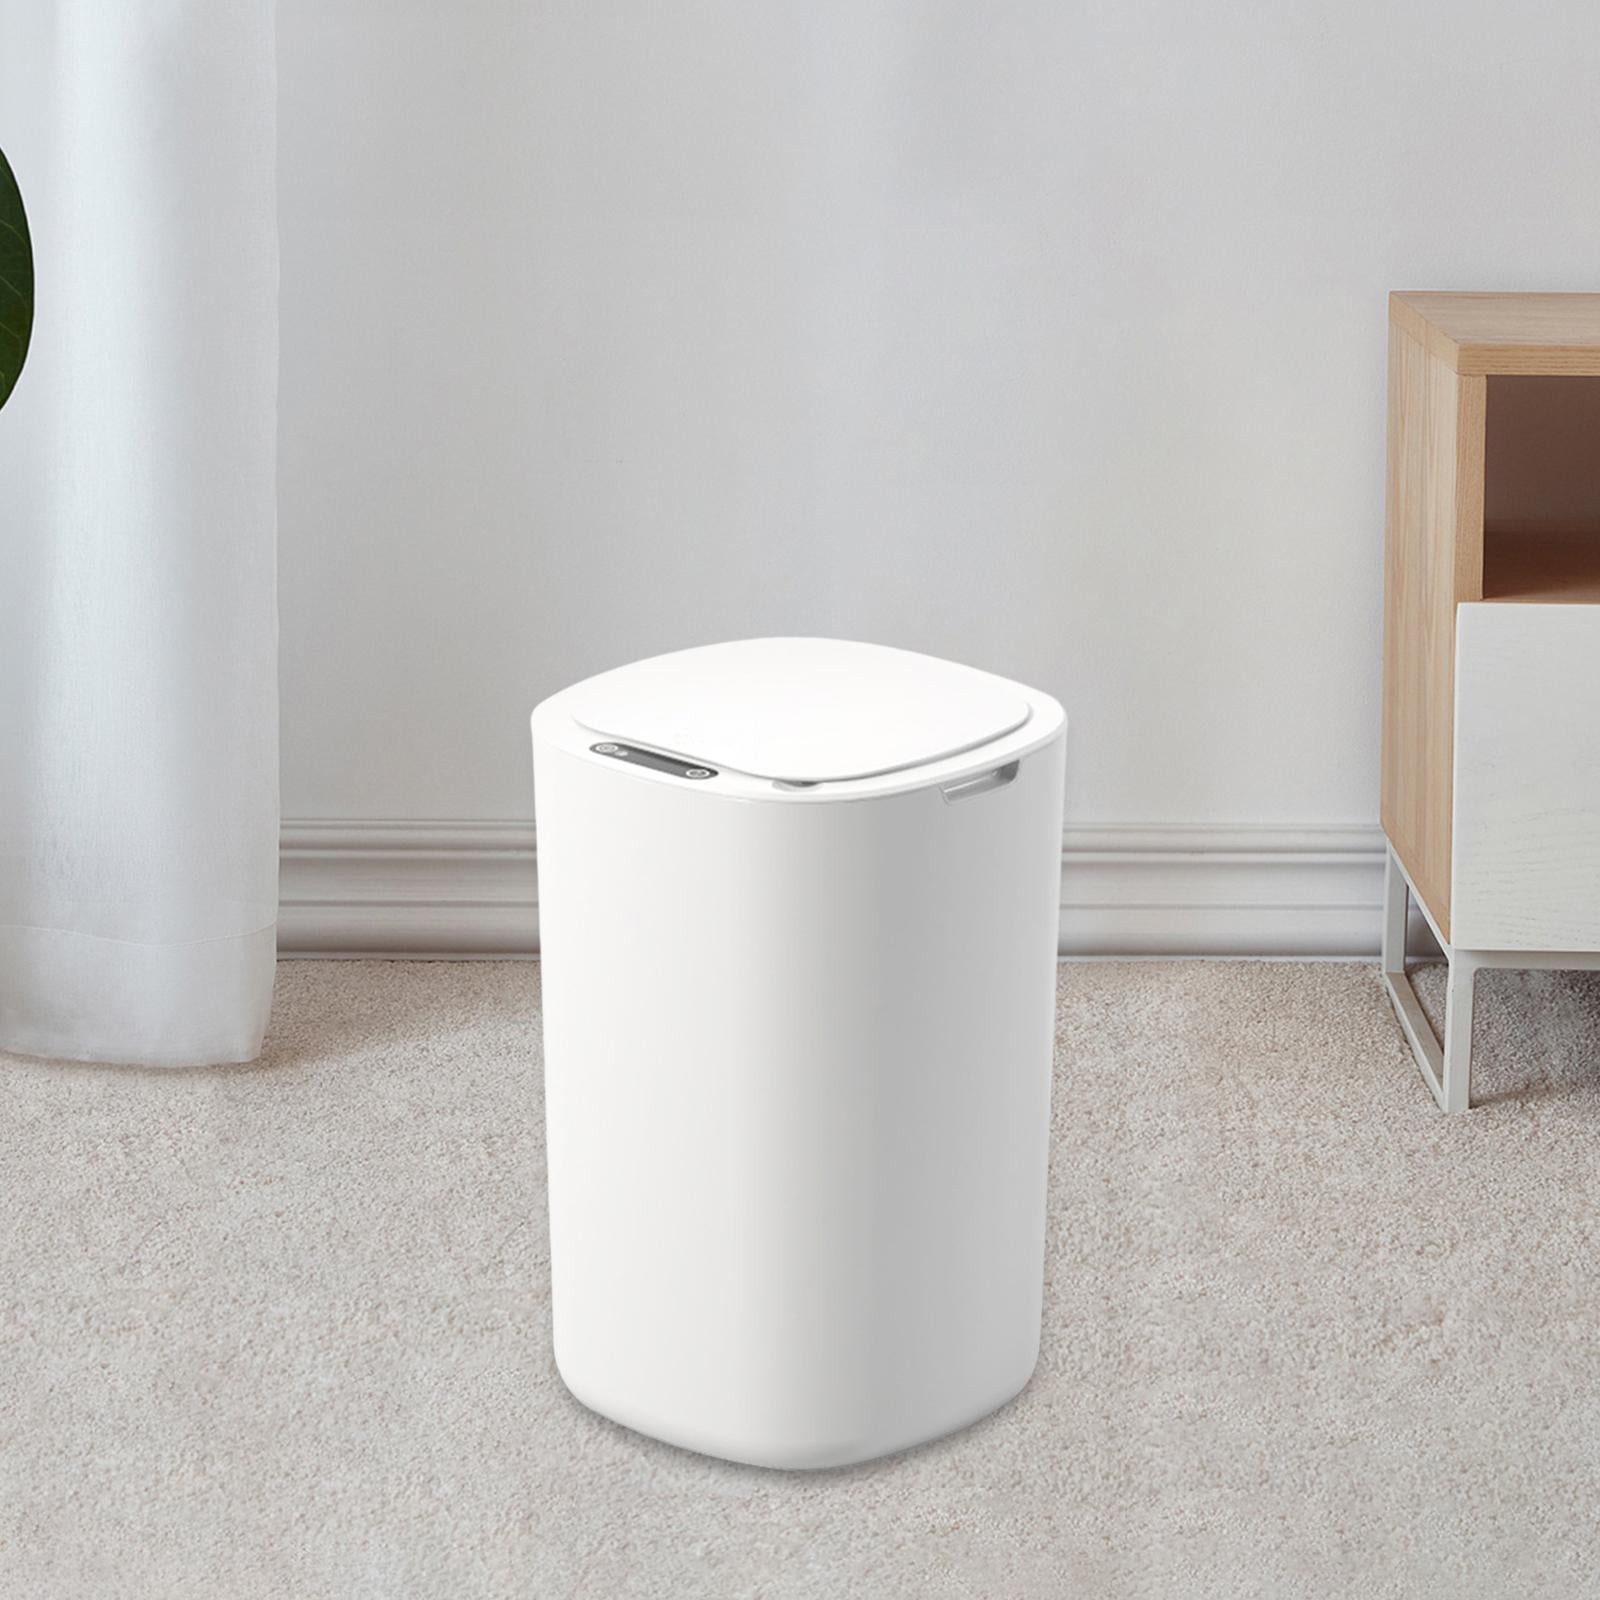 14L/16L Home Smart Induction Trash Can Bathroom Automatic